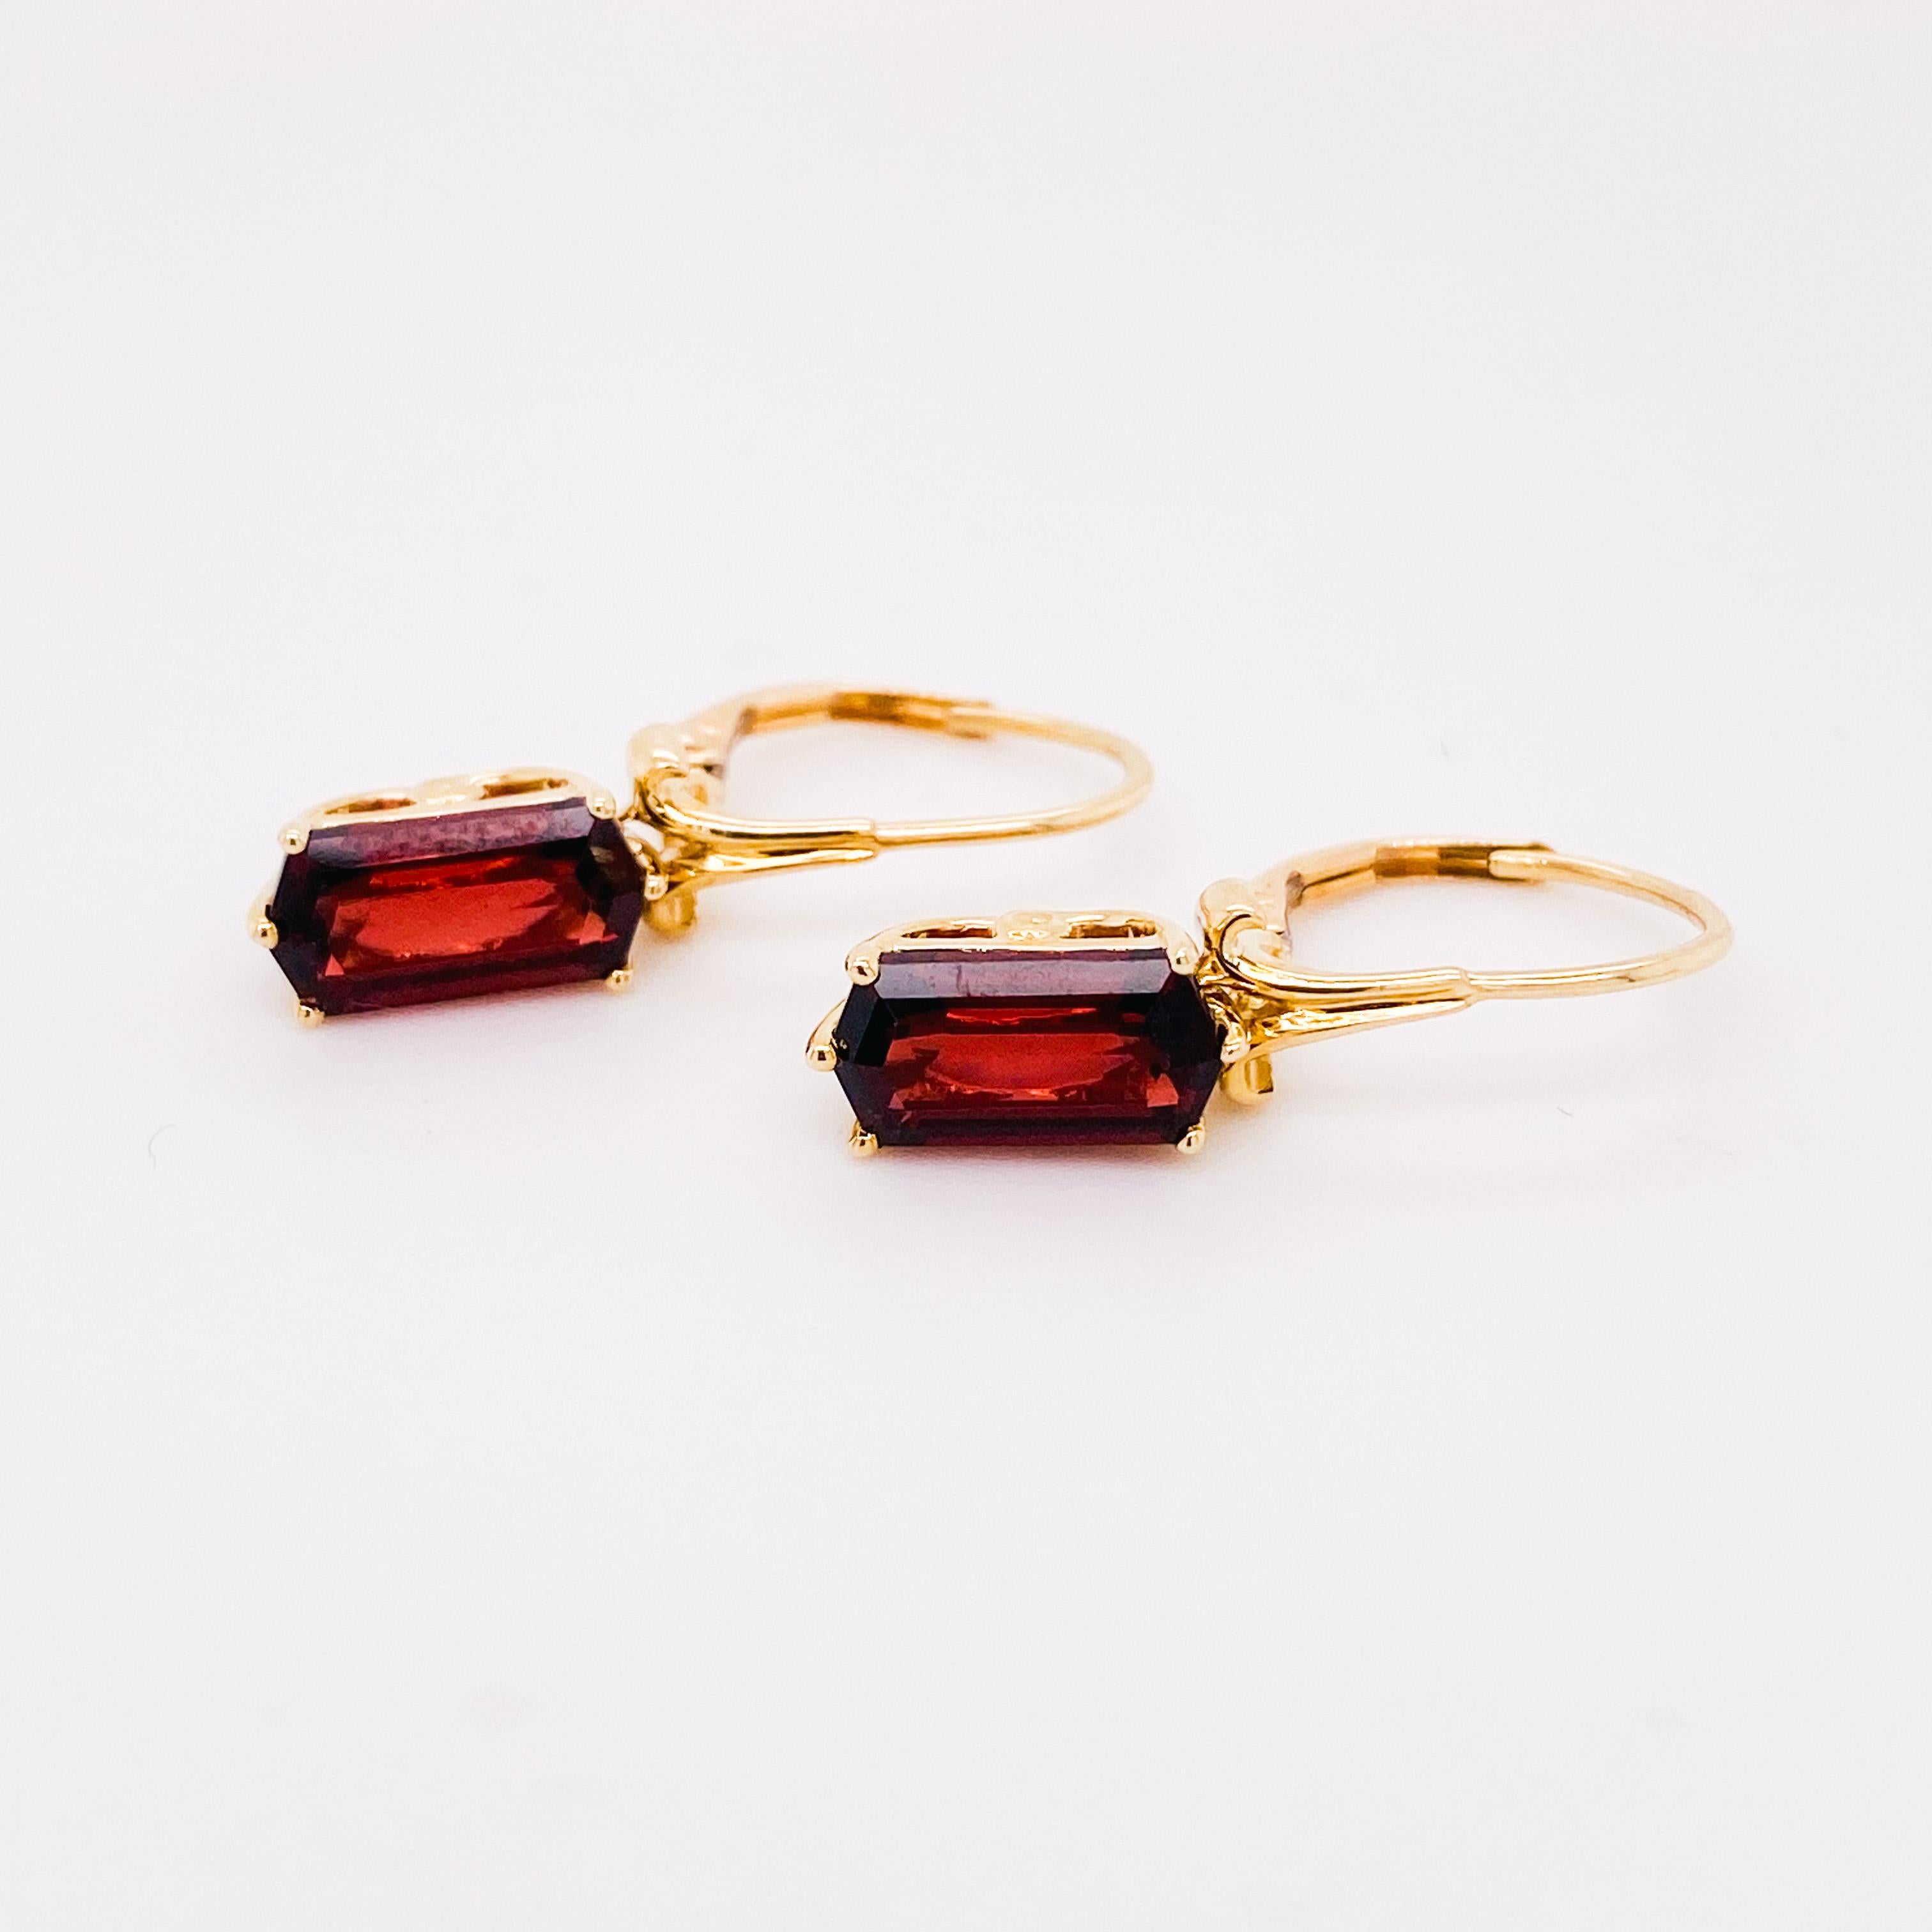 These dangle garnet earrings are a great staple earring for anyone’s wardrobe. You can wear these earrings every day to workout, to work and for dress. We even sold them as a wedding earring. Designed in 14 karat yellow gold with secure lever backs,